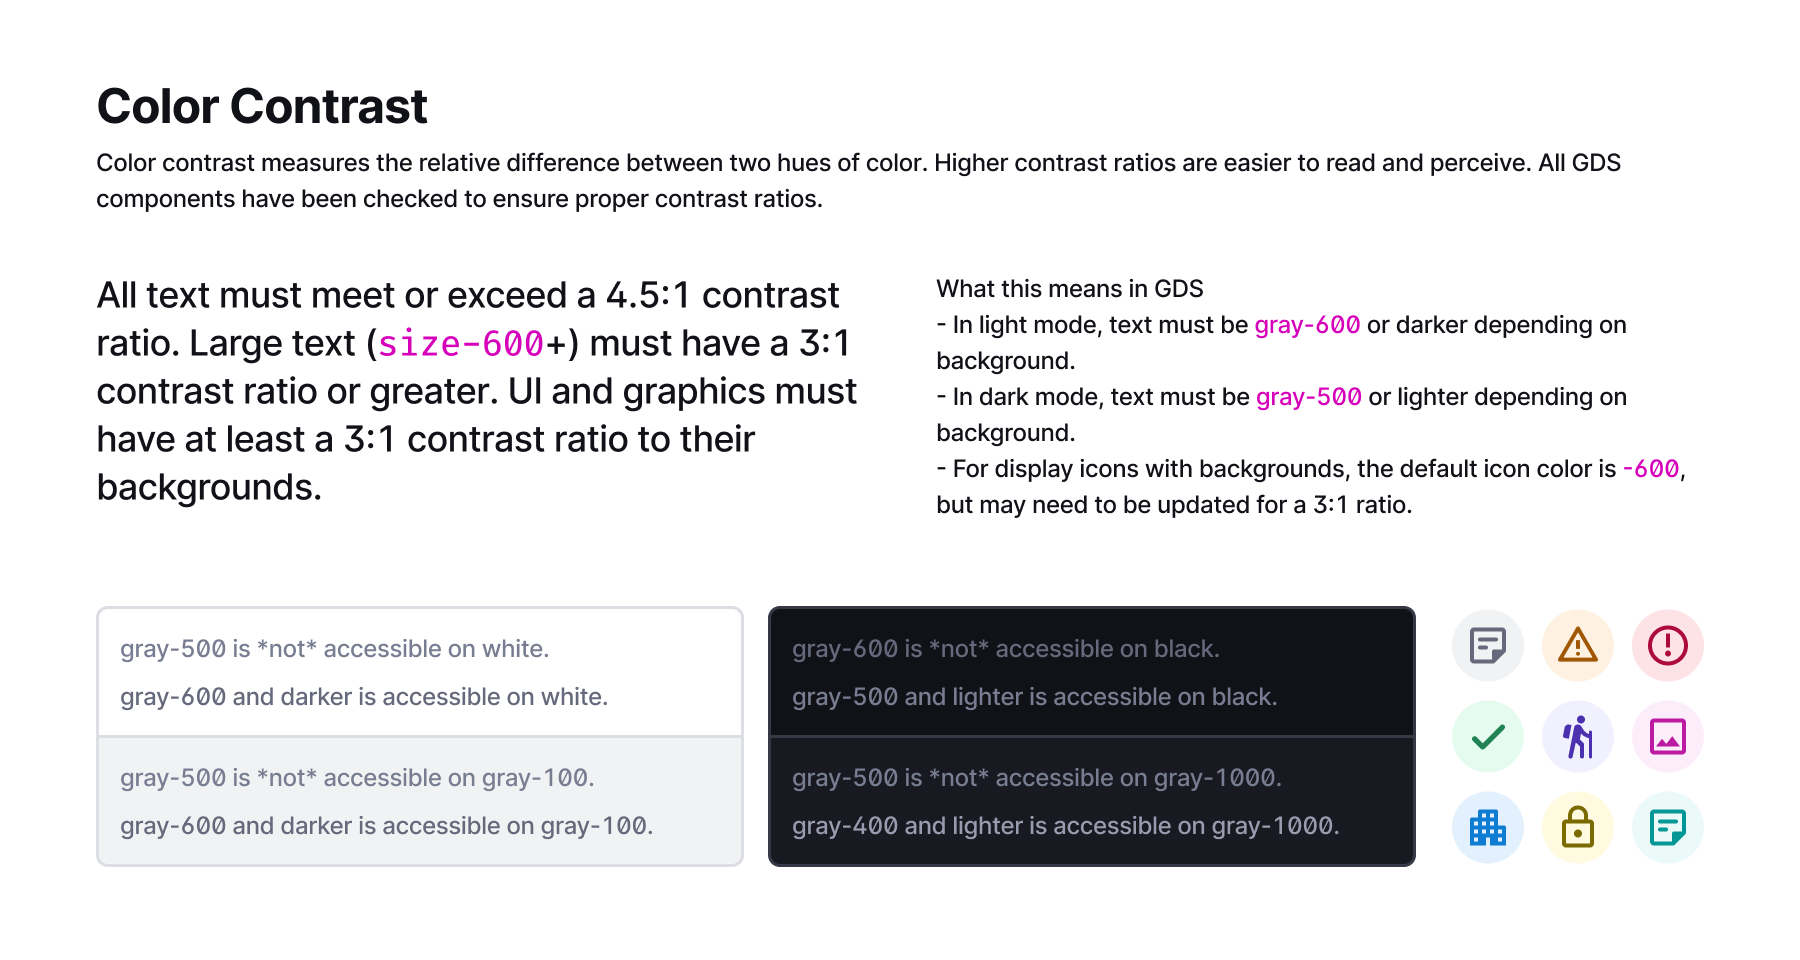 Documentation about color contrast in GDS